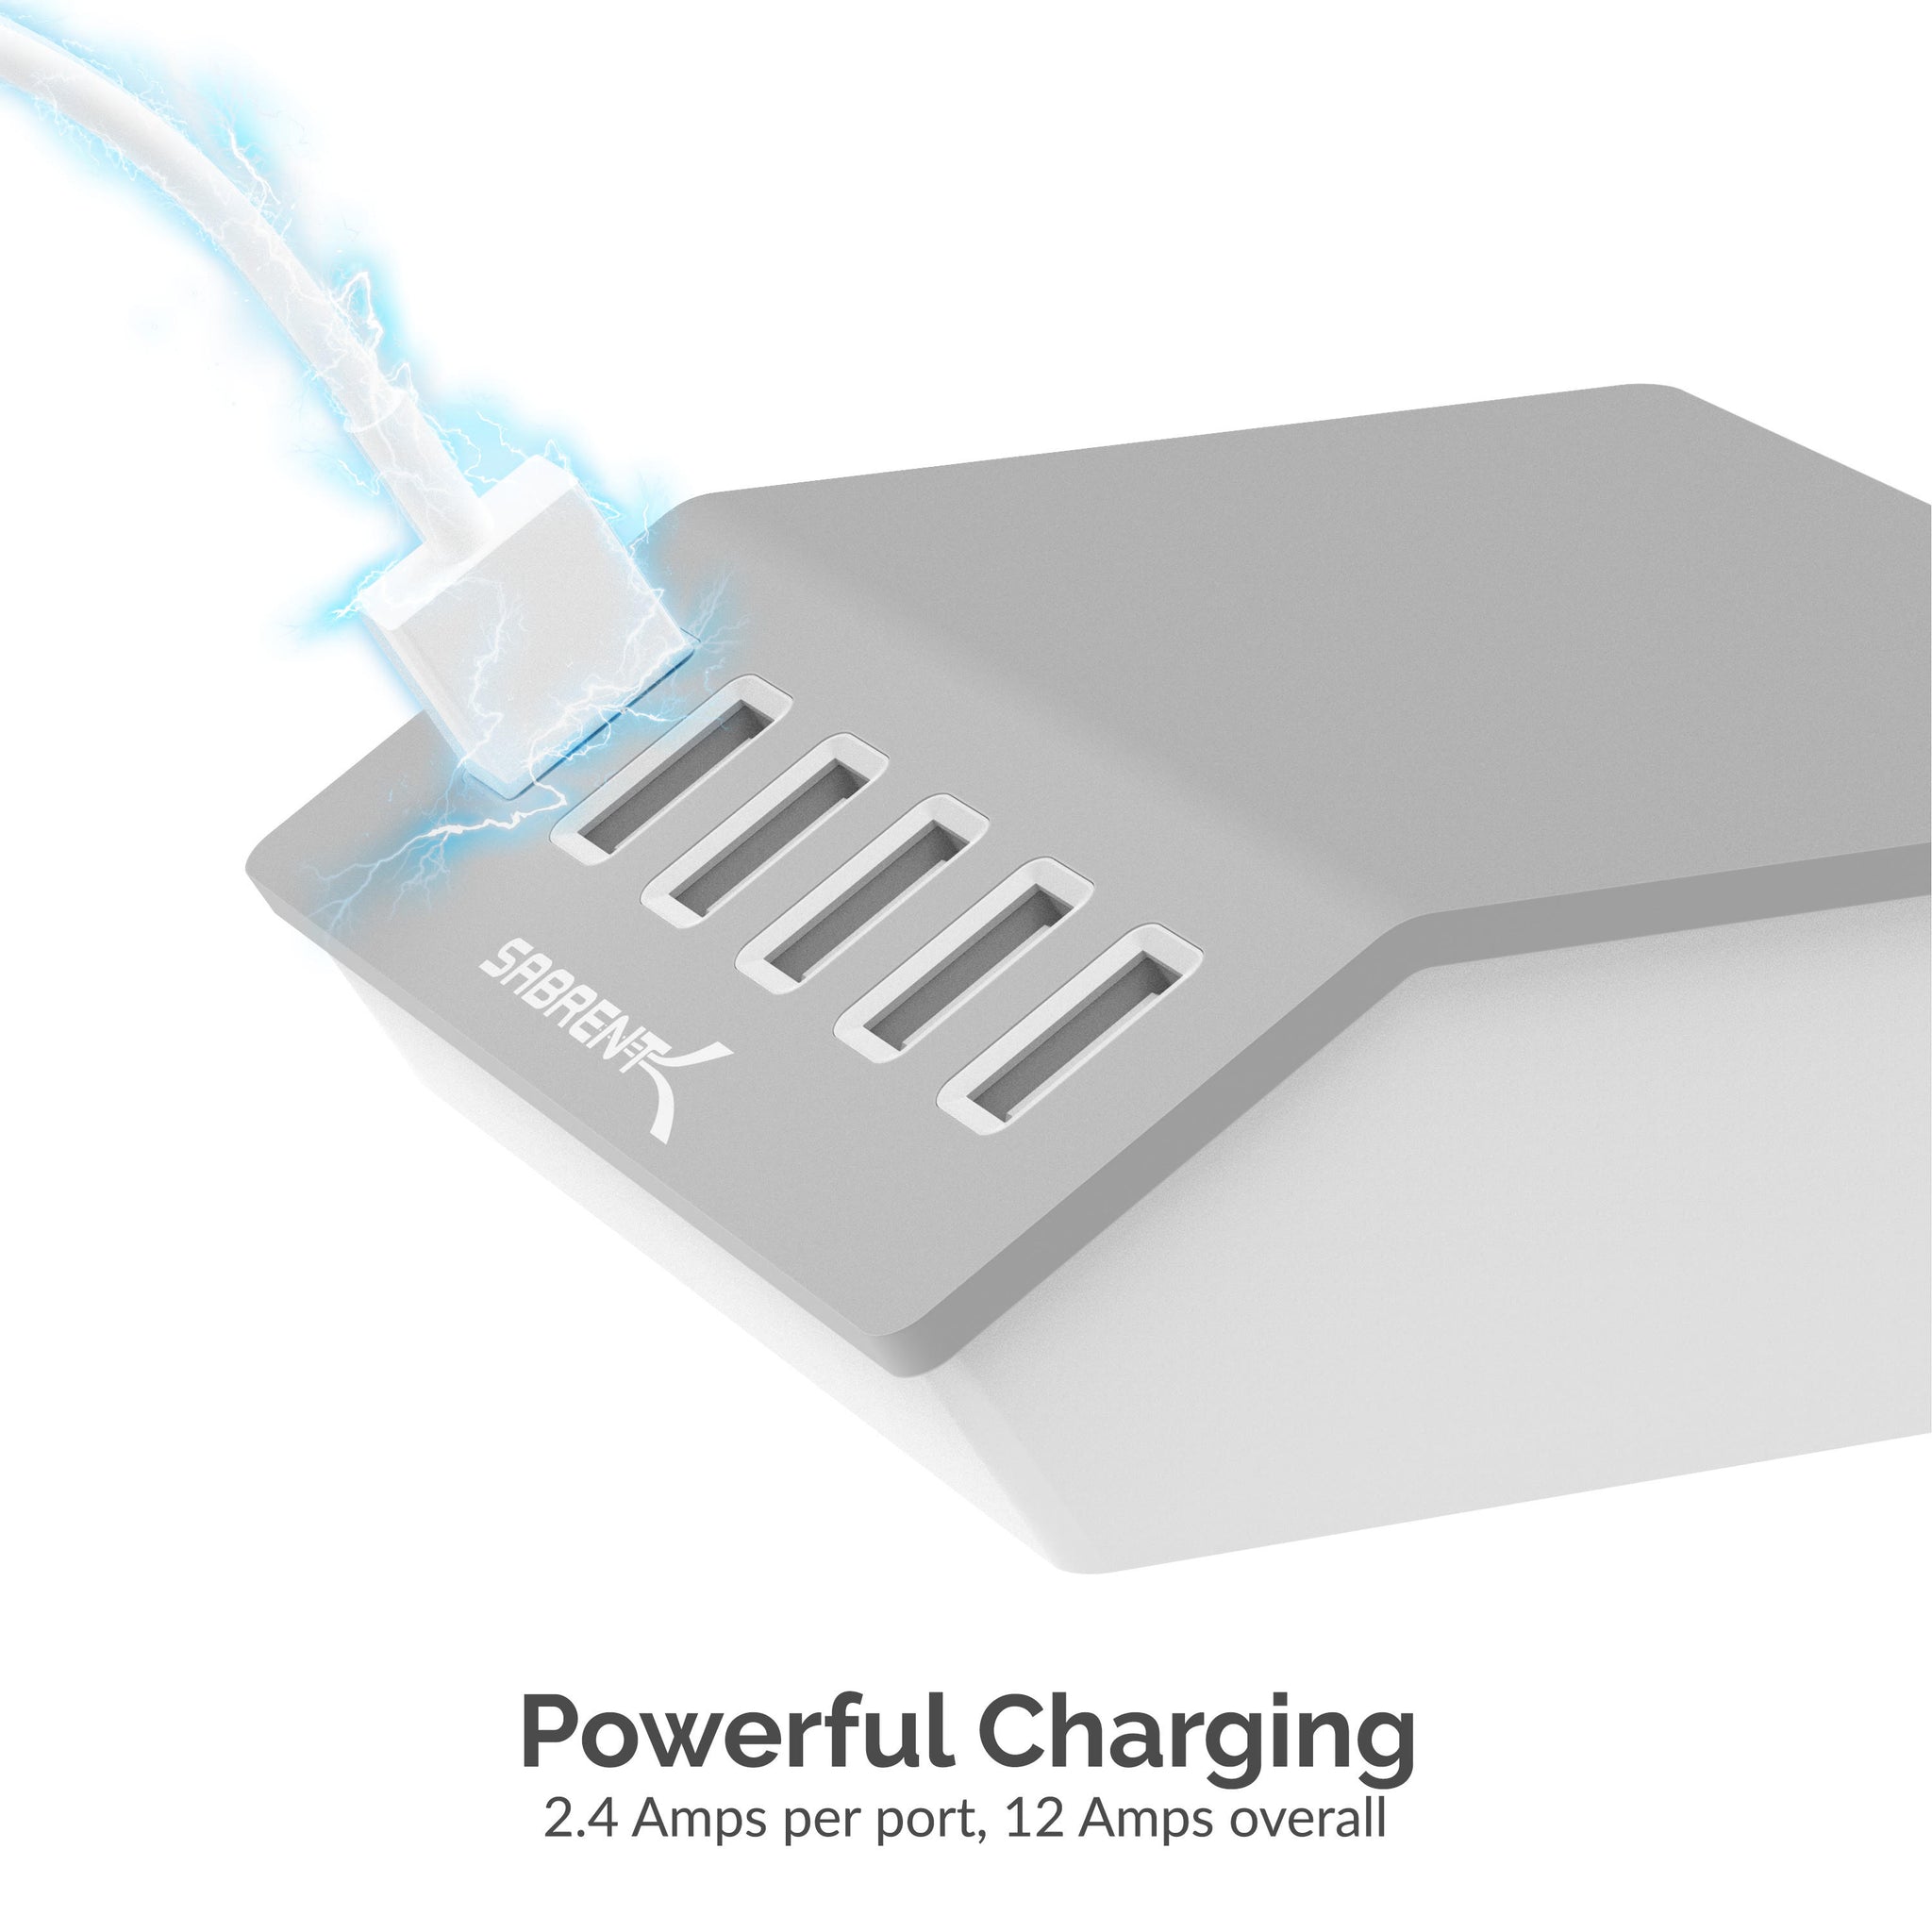 SABRENT 100 Watt 8-Port USB Rapid Charger [UL Certified ] - Includes 2 PD +  [6-Pack] Premium 6FT USB-C to USB A 2.0 Sync and Charge Cables